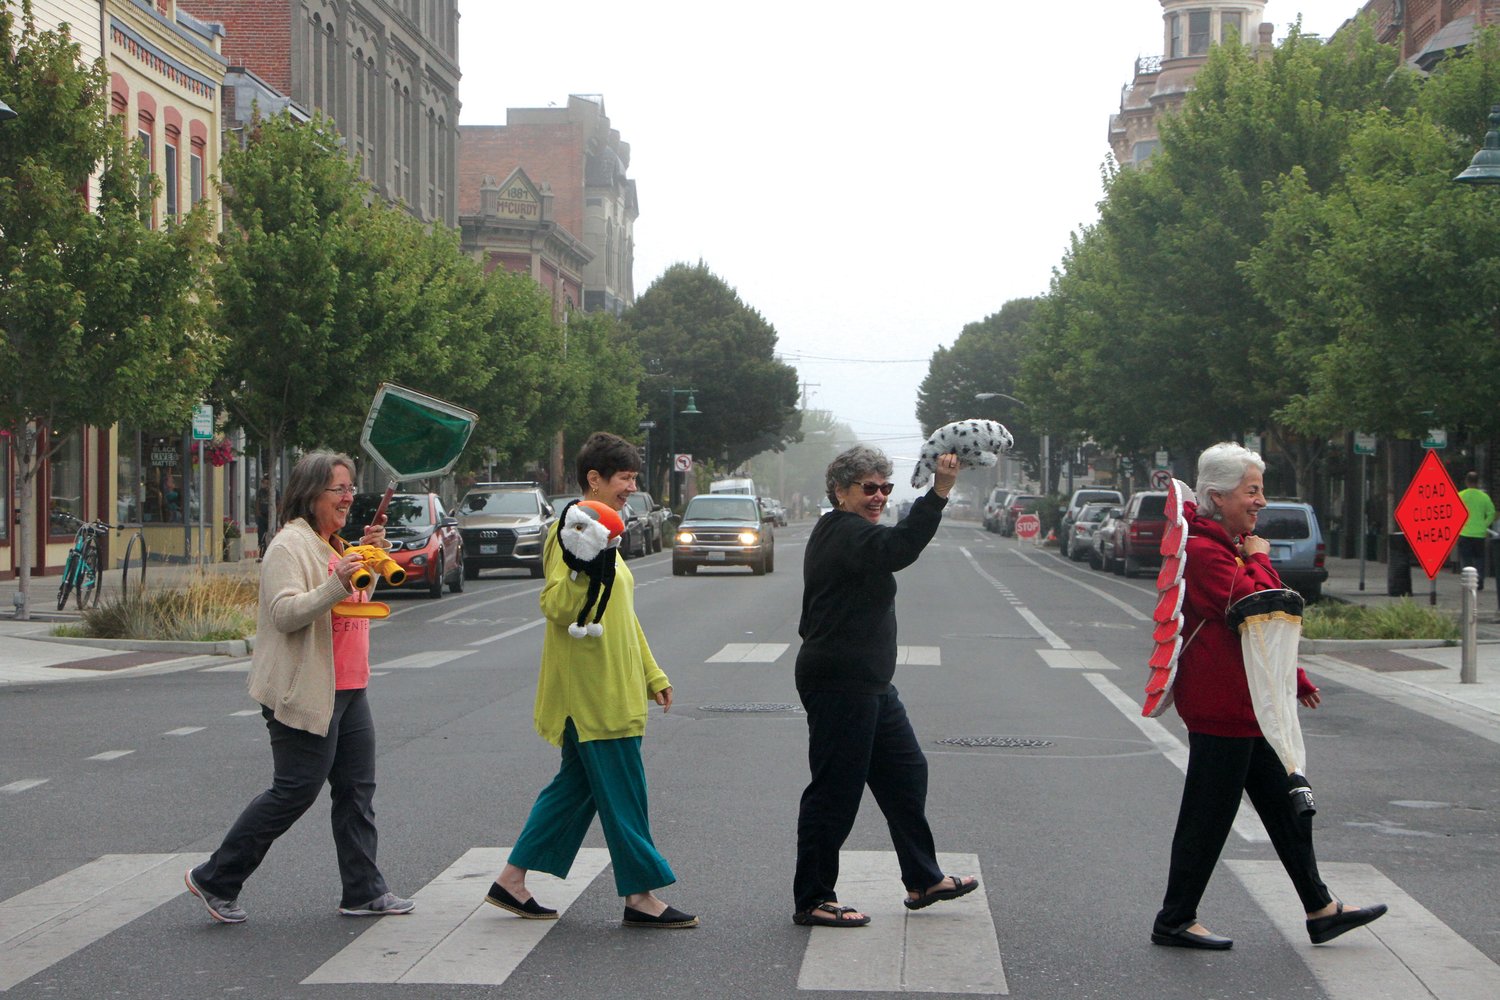 The science center’s board and staff members make their way across the historic downtown street a la Abbey Road with iconic artifacts in tow.